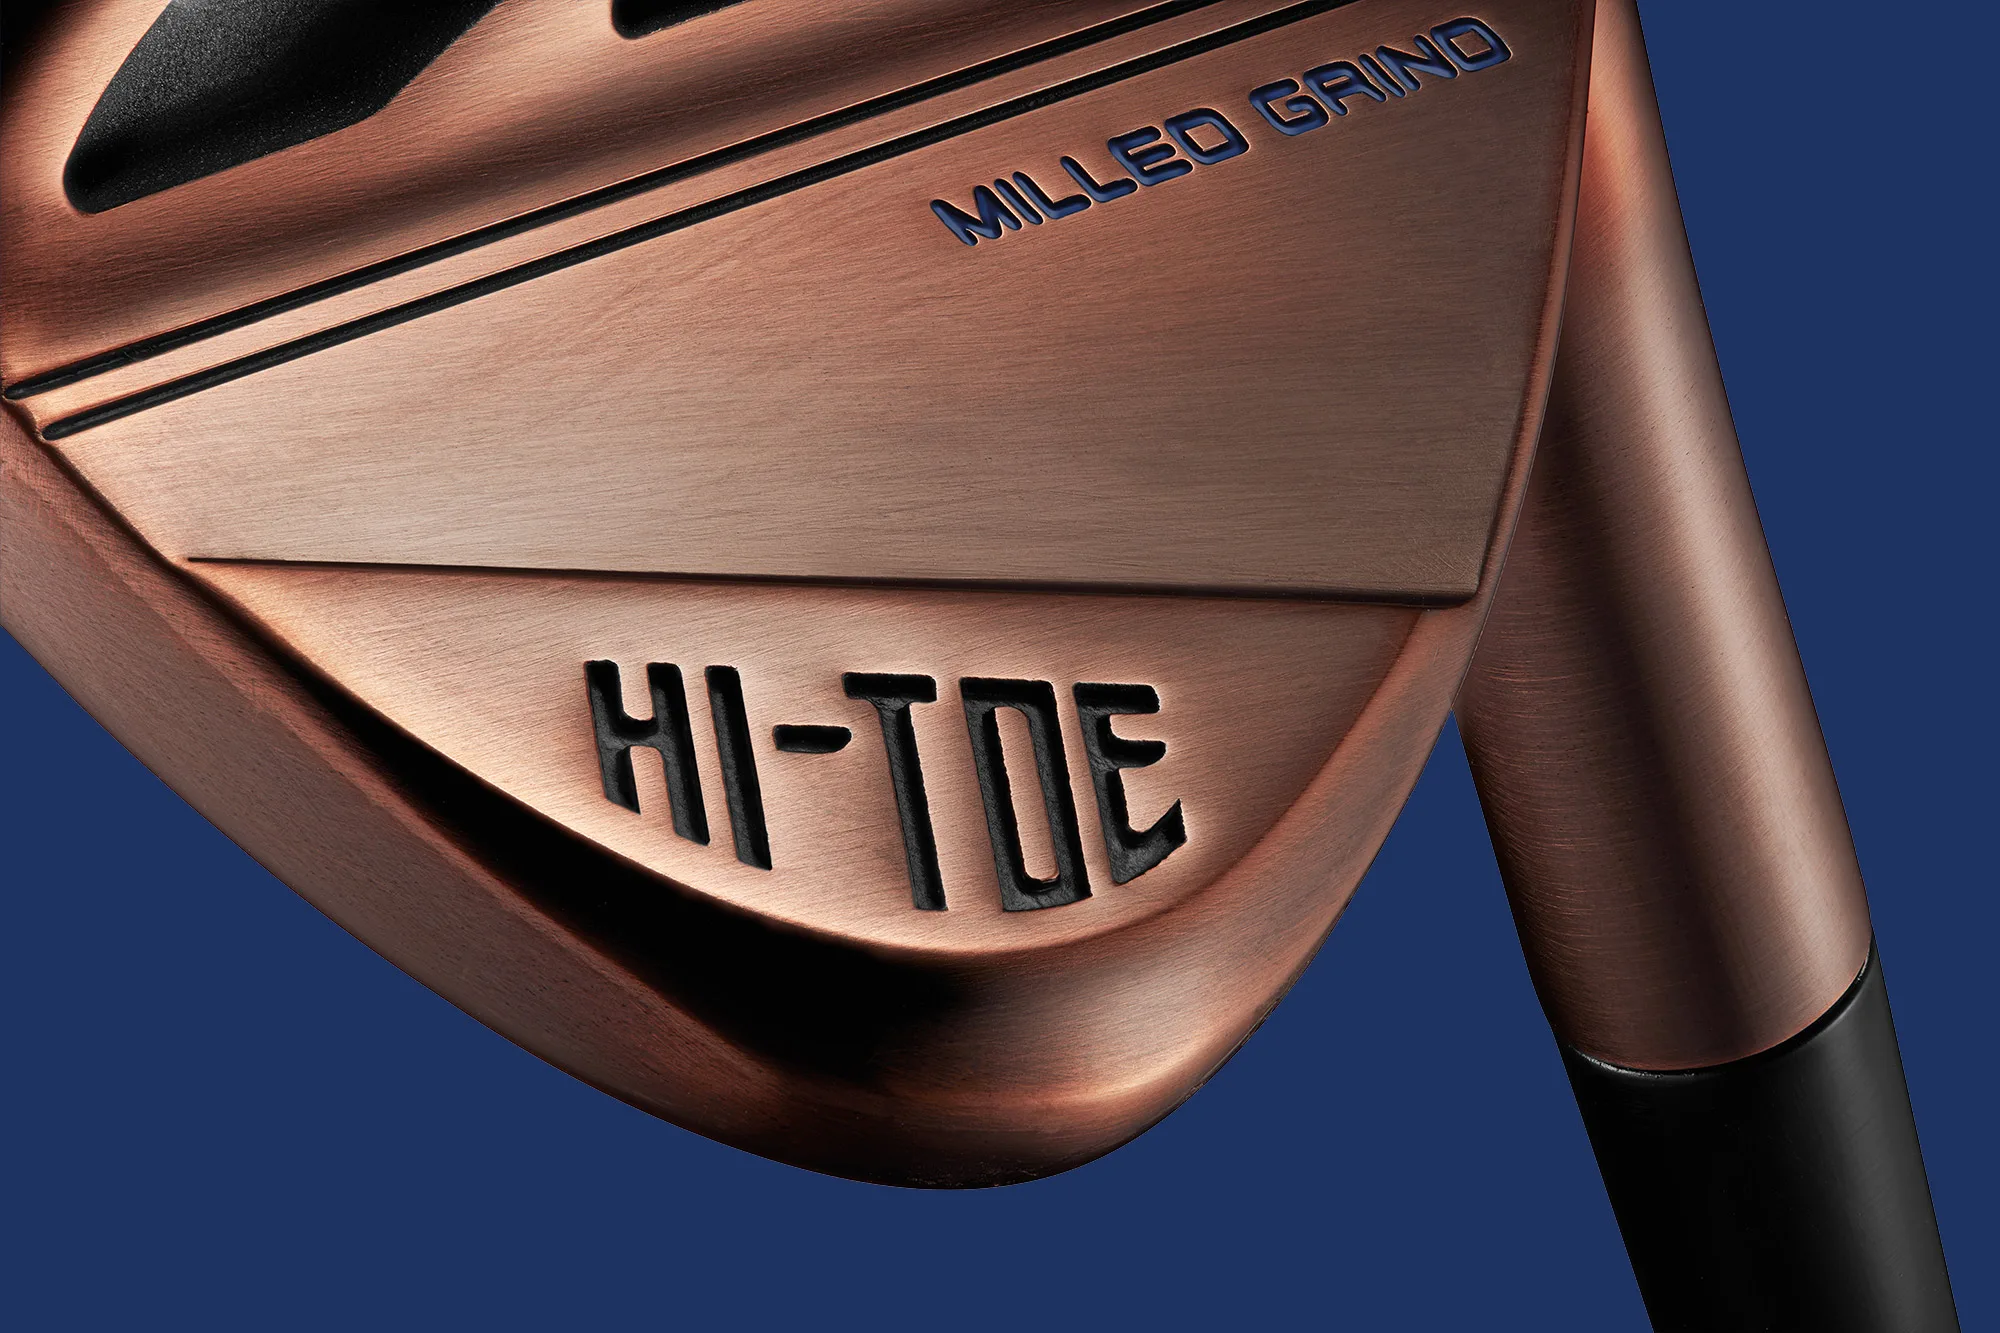 TaylorMade Hi-Toe wedges are back – and this time they're raw